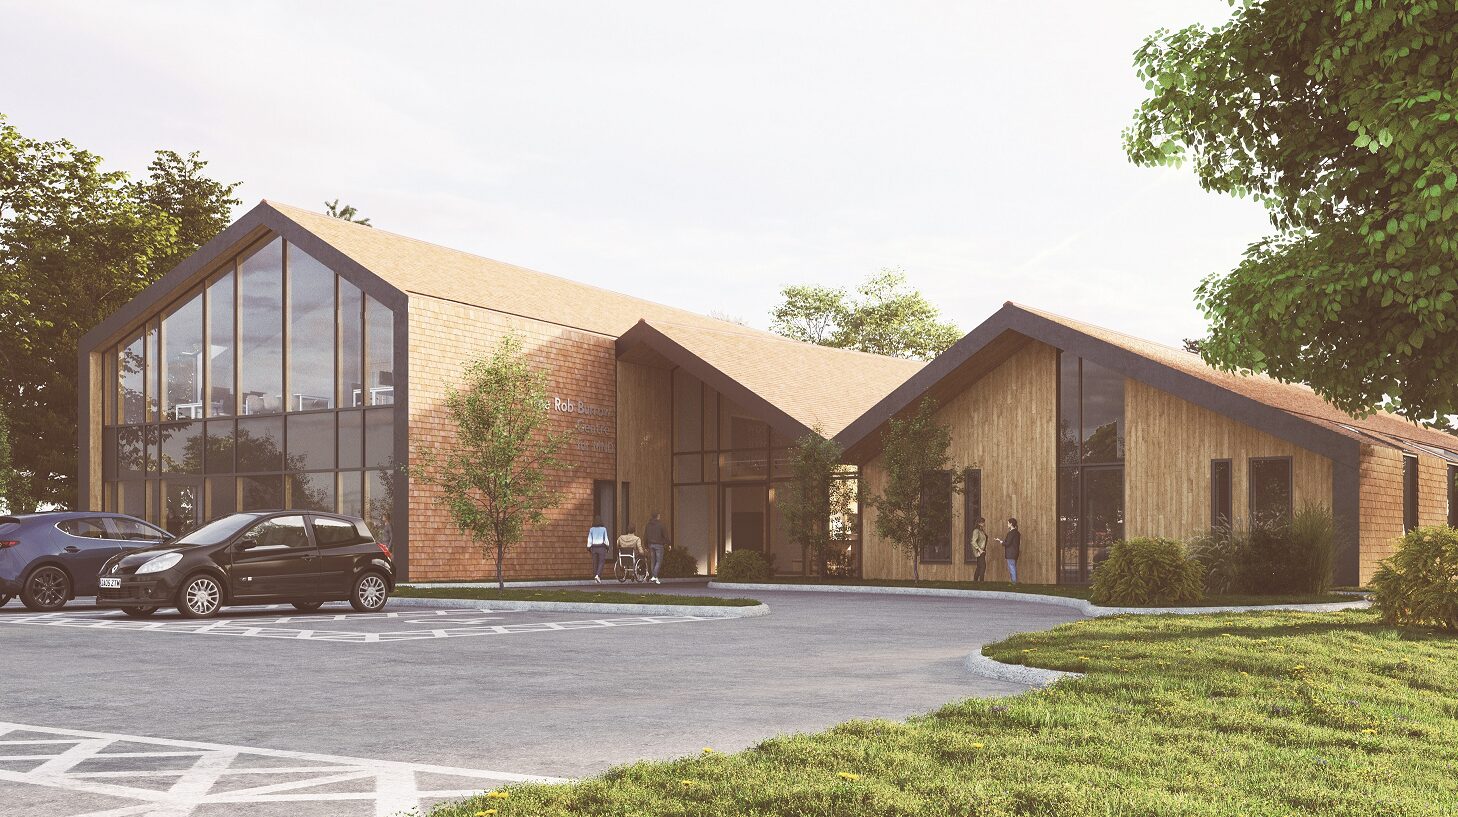 An artist's impression of the new Rob Burrow Centre for Motor Neurone Disease, showing a low building with a zig zag roofline, with a large glassed front.